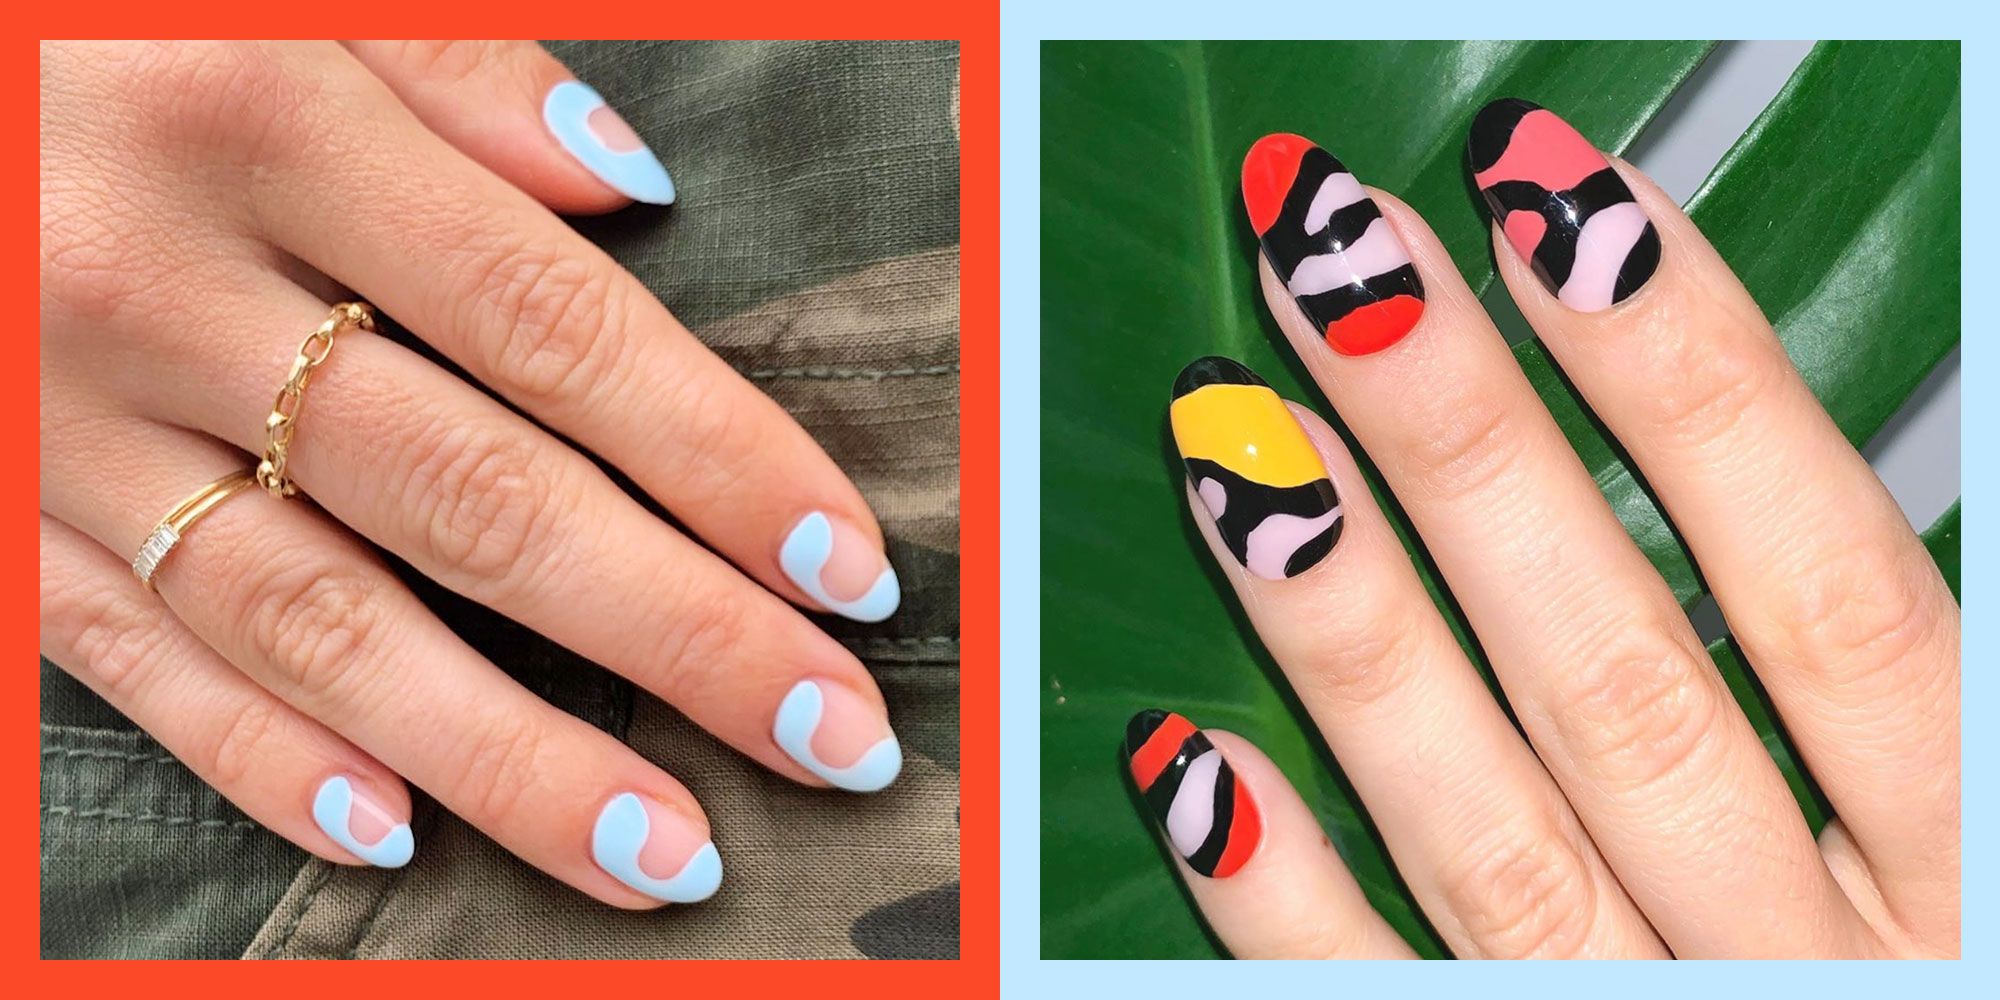 8. Cheap and Chic: Nail Art Trends in Seoul That Won't Break the Bank - wide 1